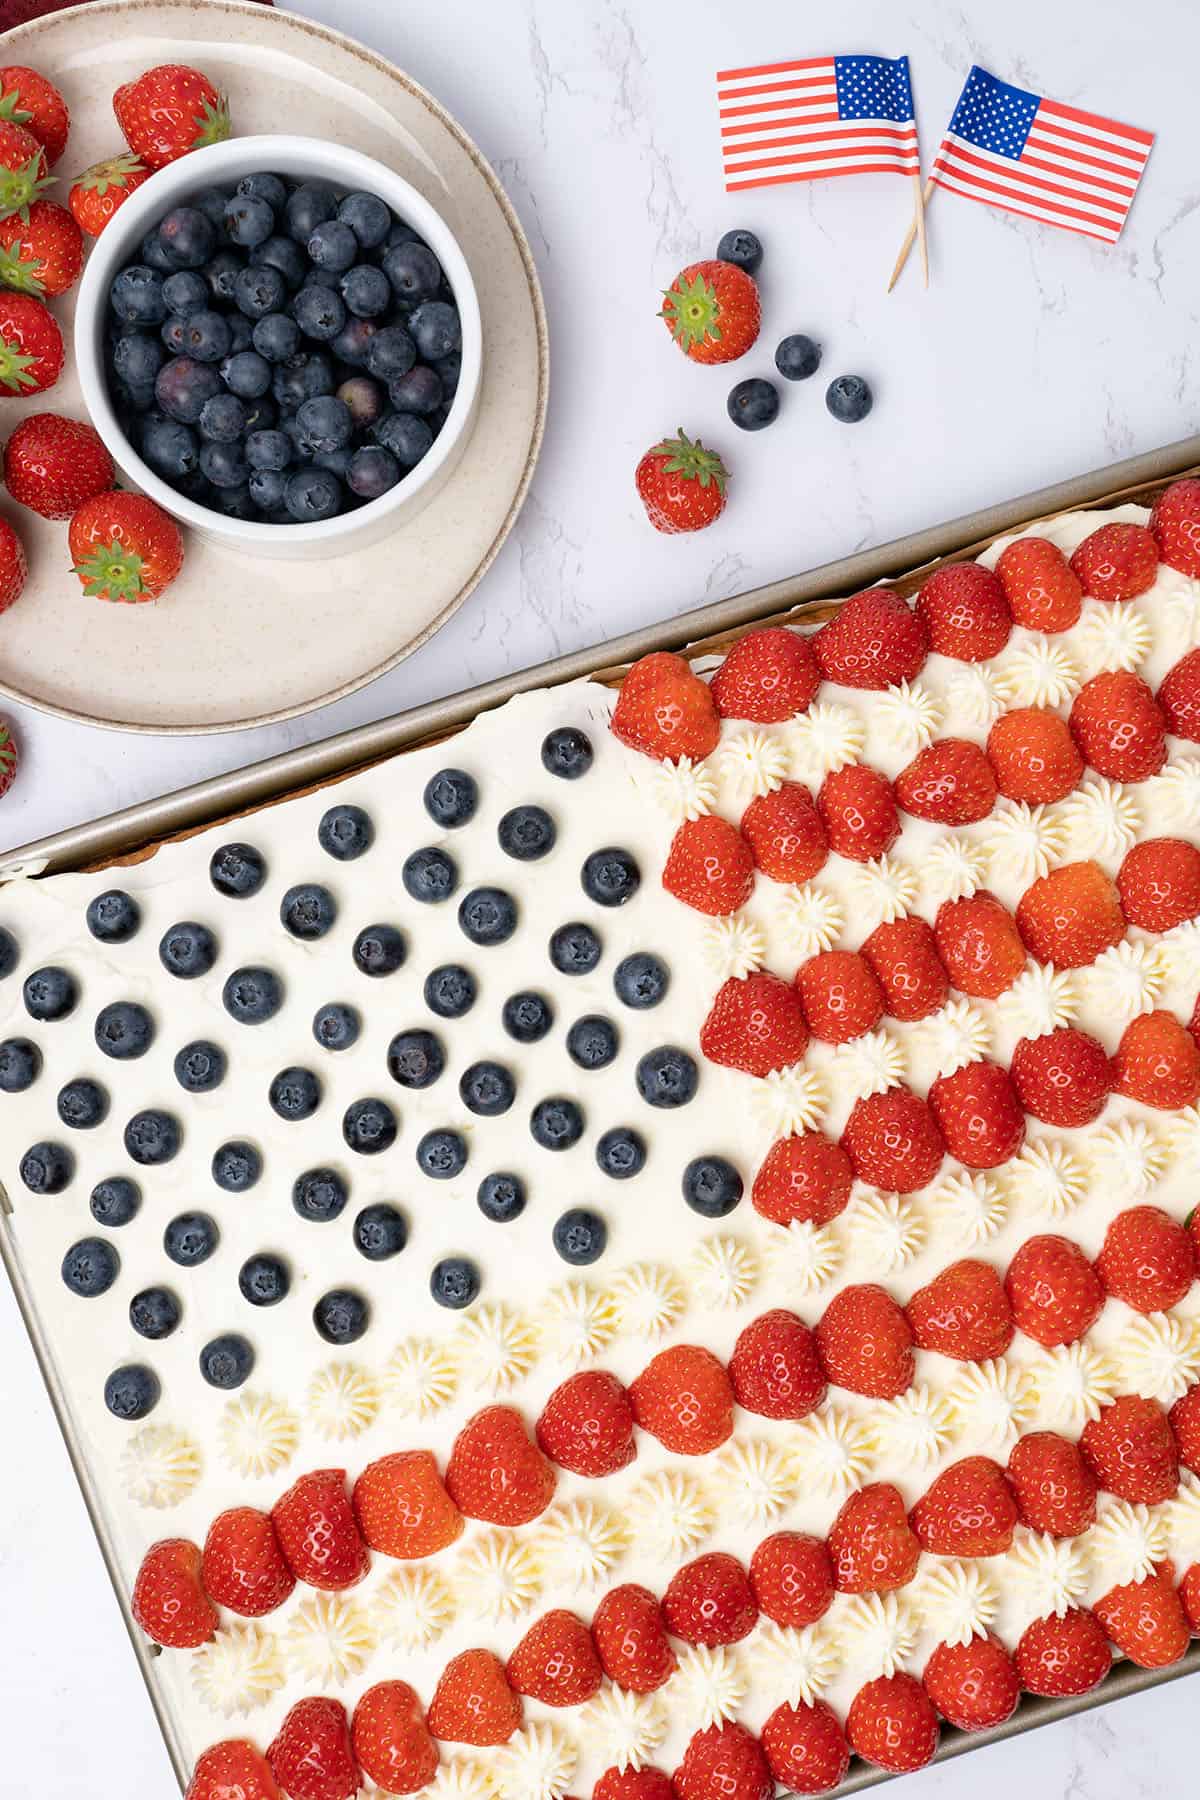 American flag cake with berries.